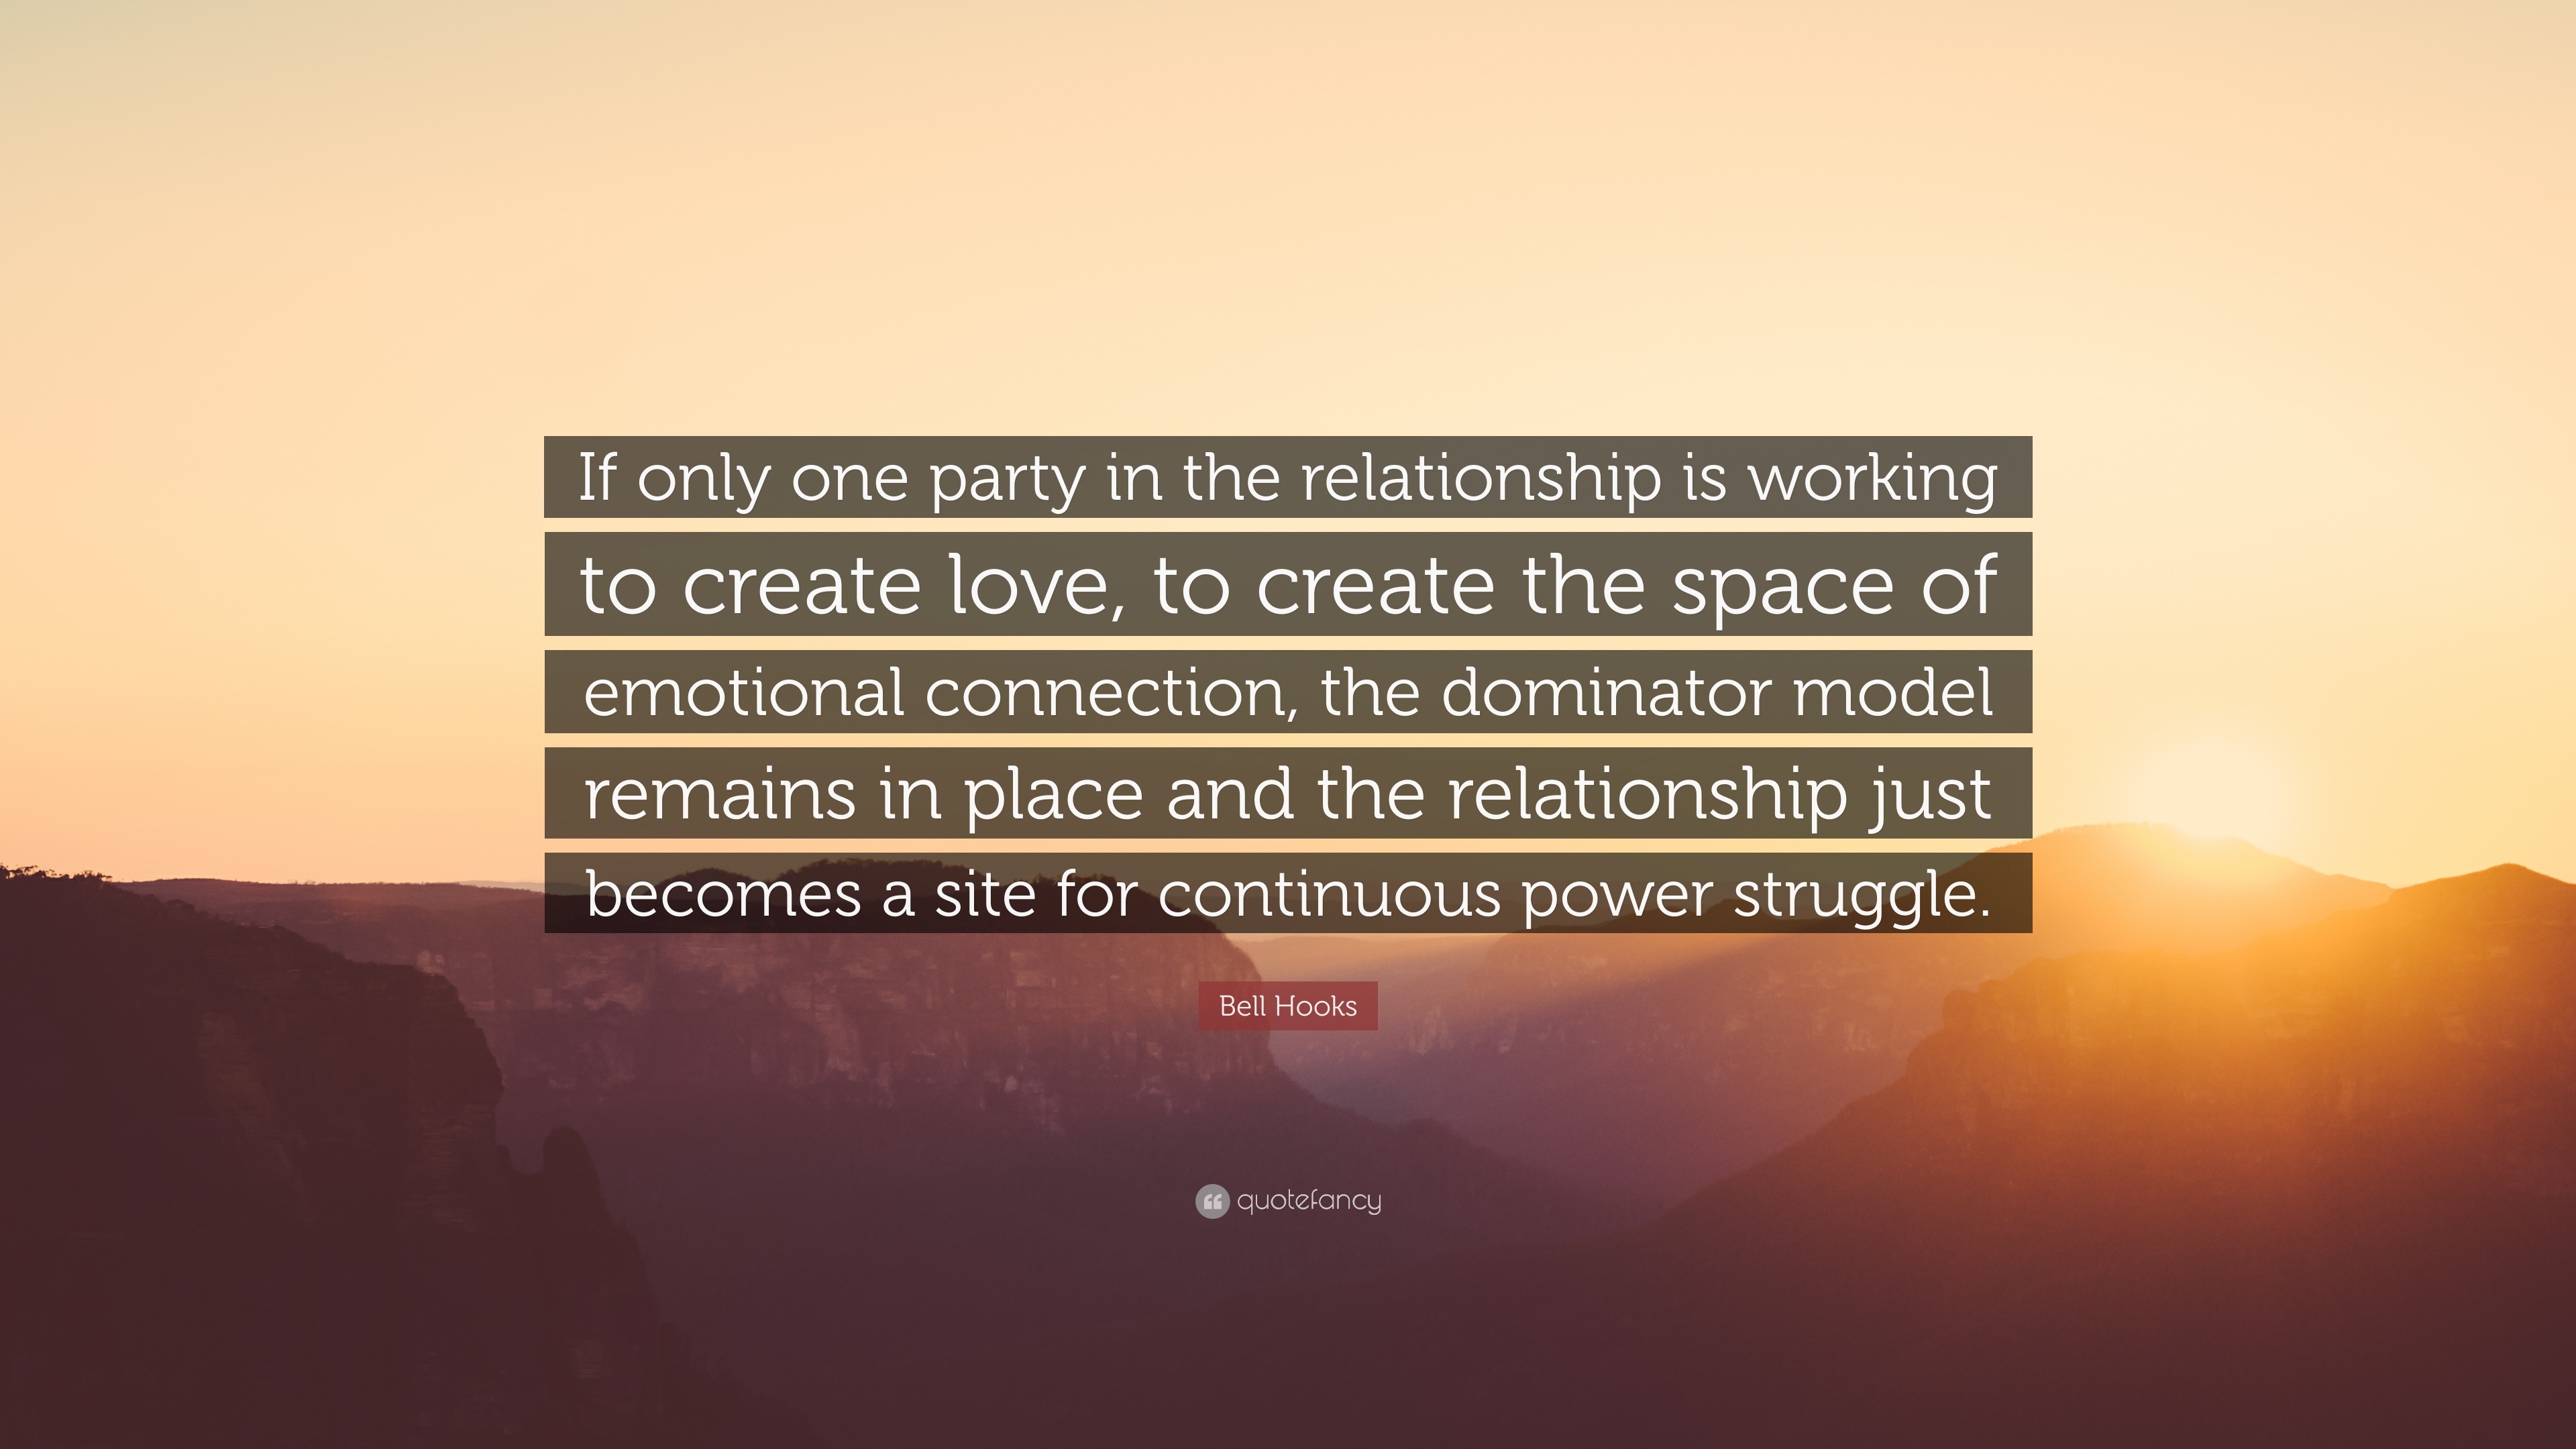 Bell Hooks Quote “If only one party in the relationship is working to create